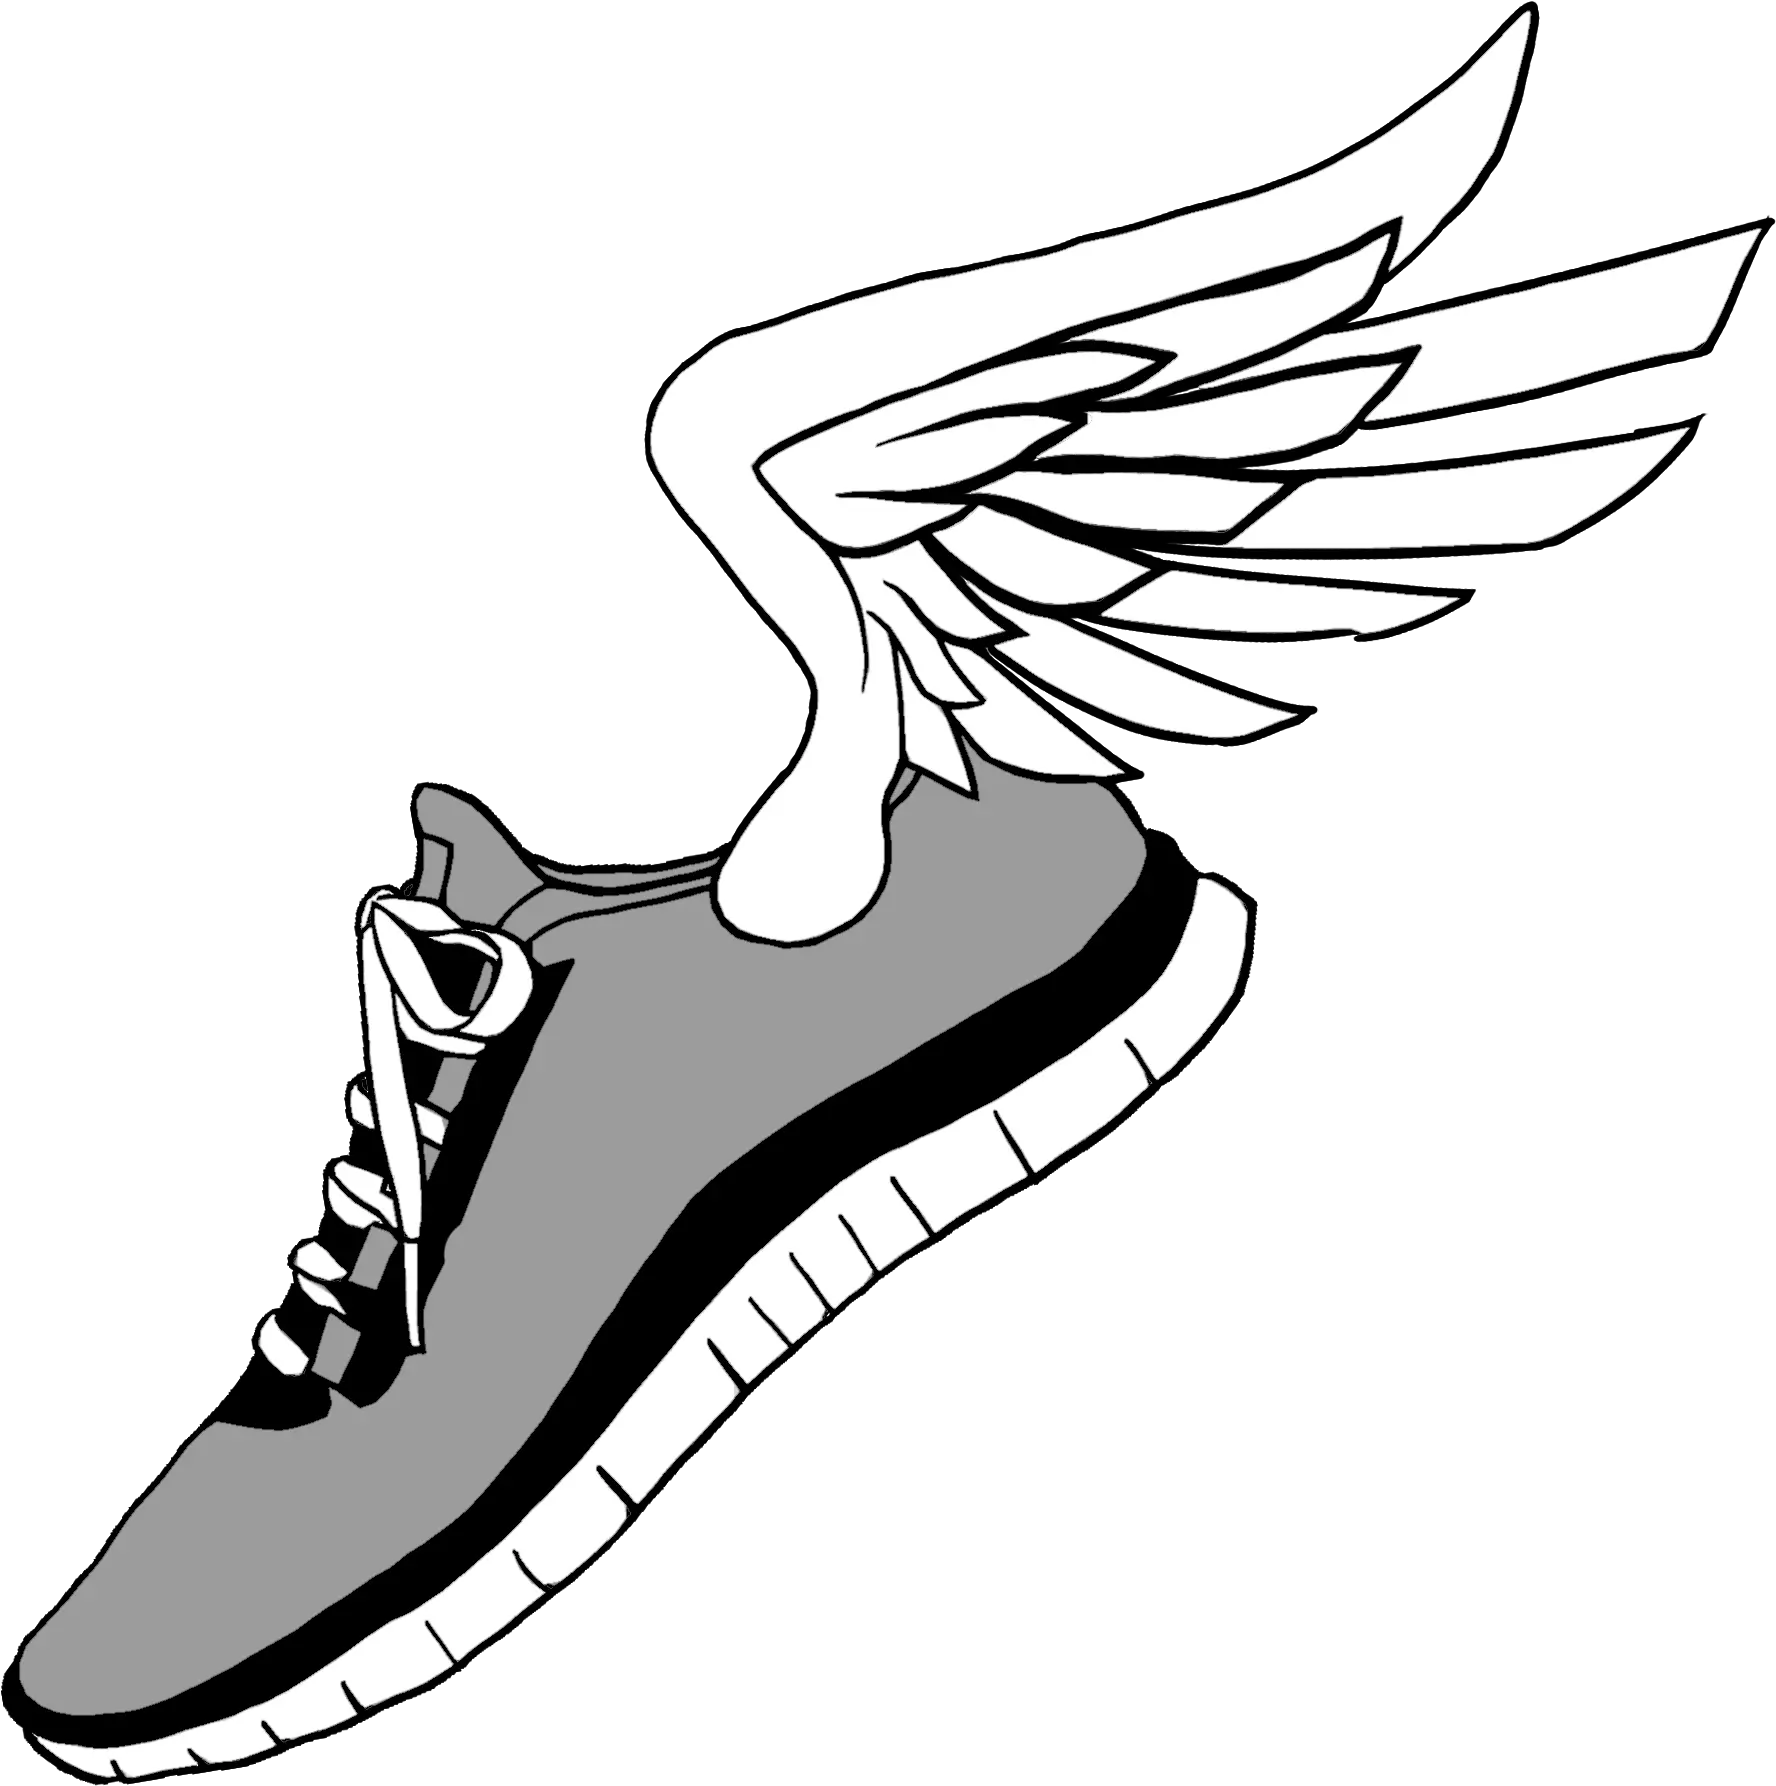 Running Shoes Clip Art Running Shoes With Wings Png Transparent Background Running Shoes Clipart Wing Png